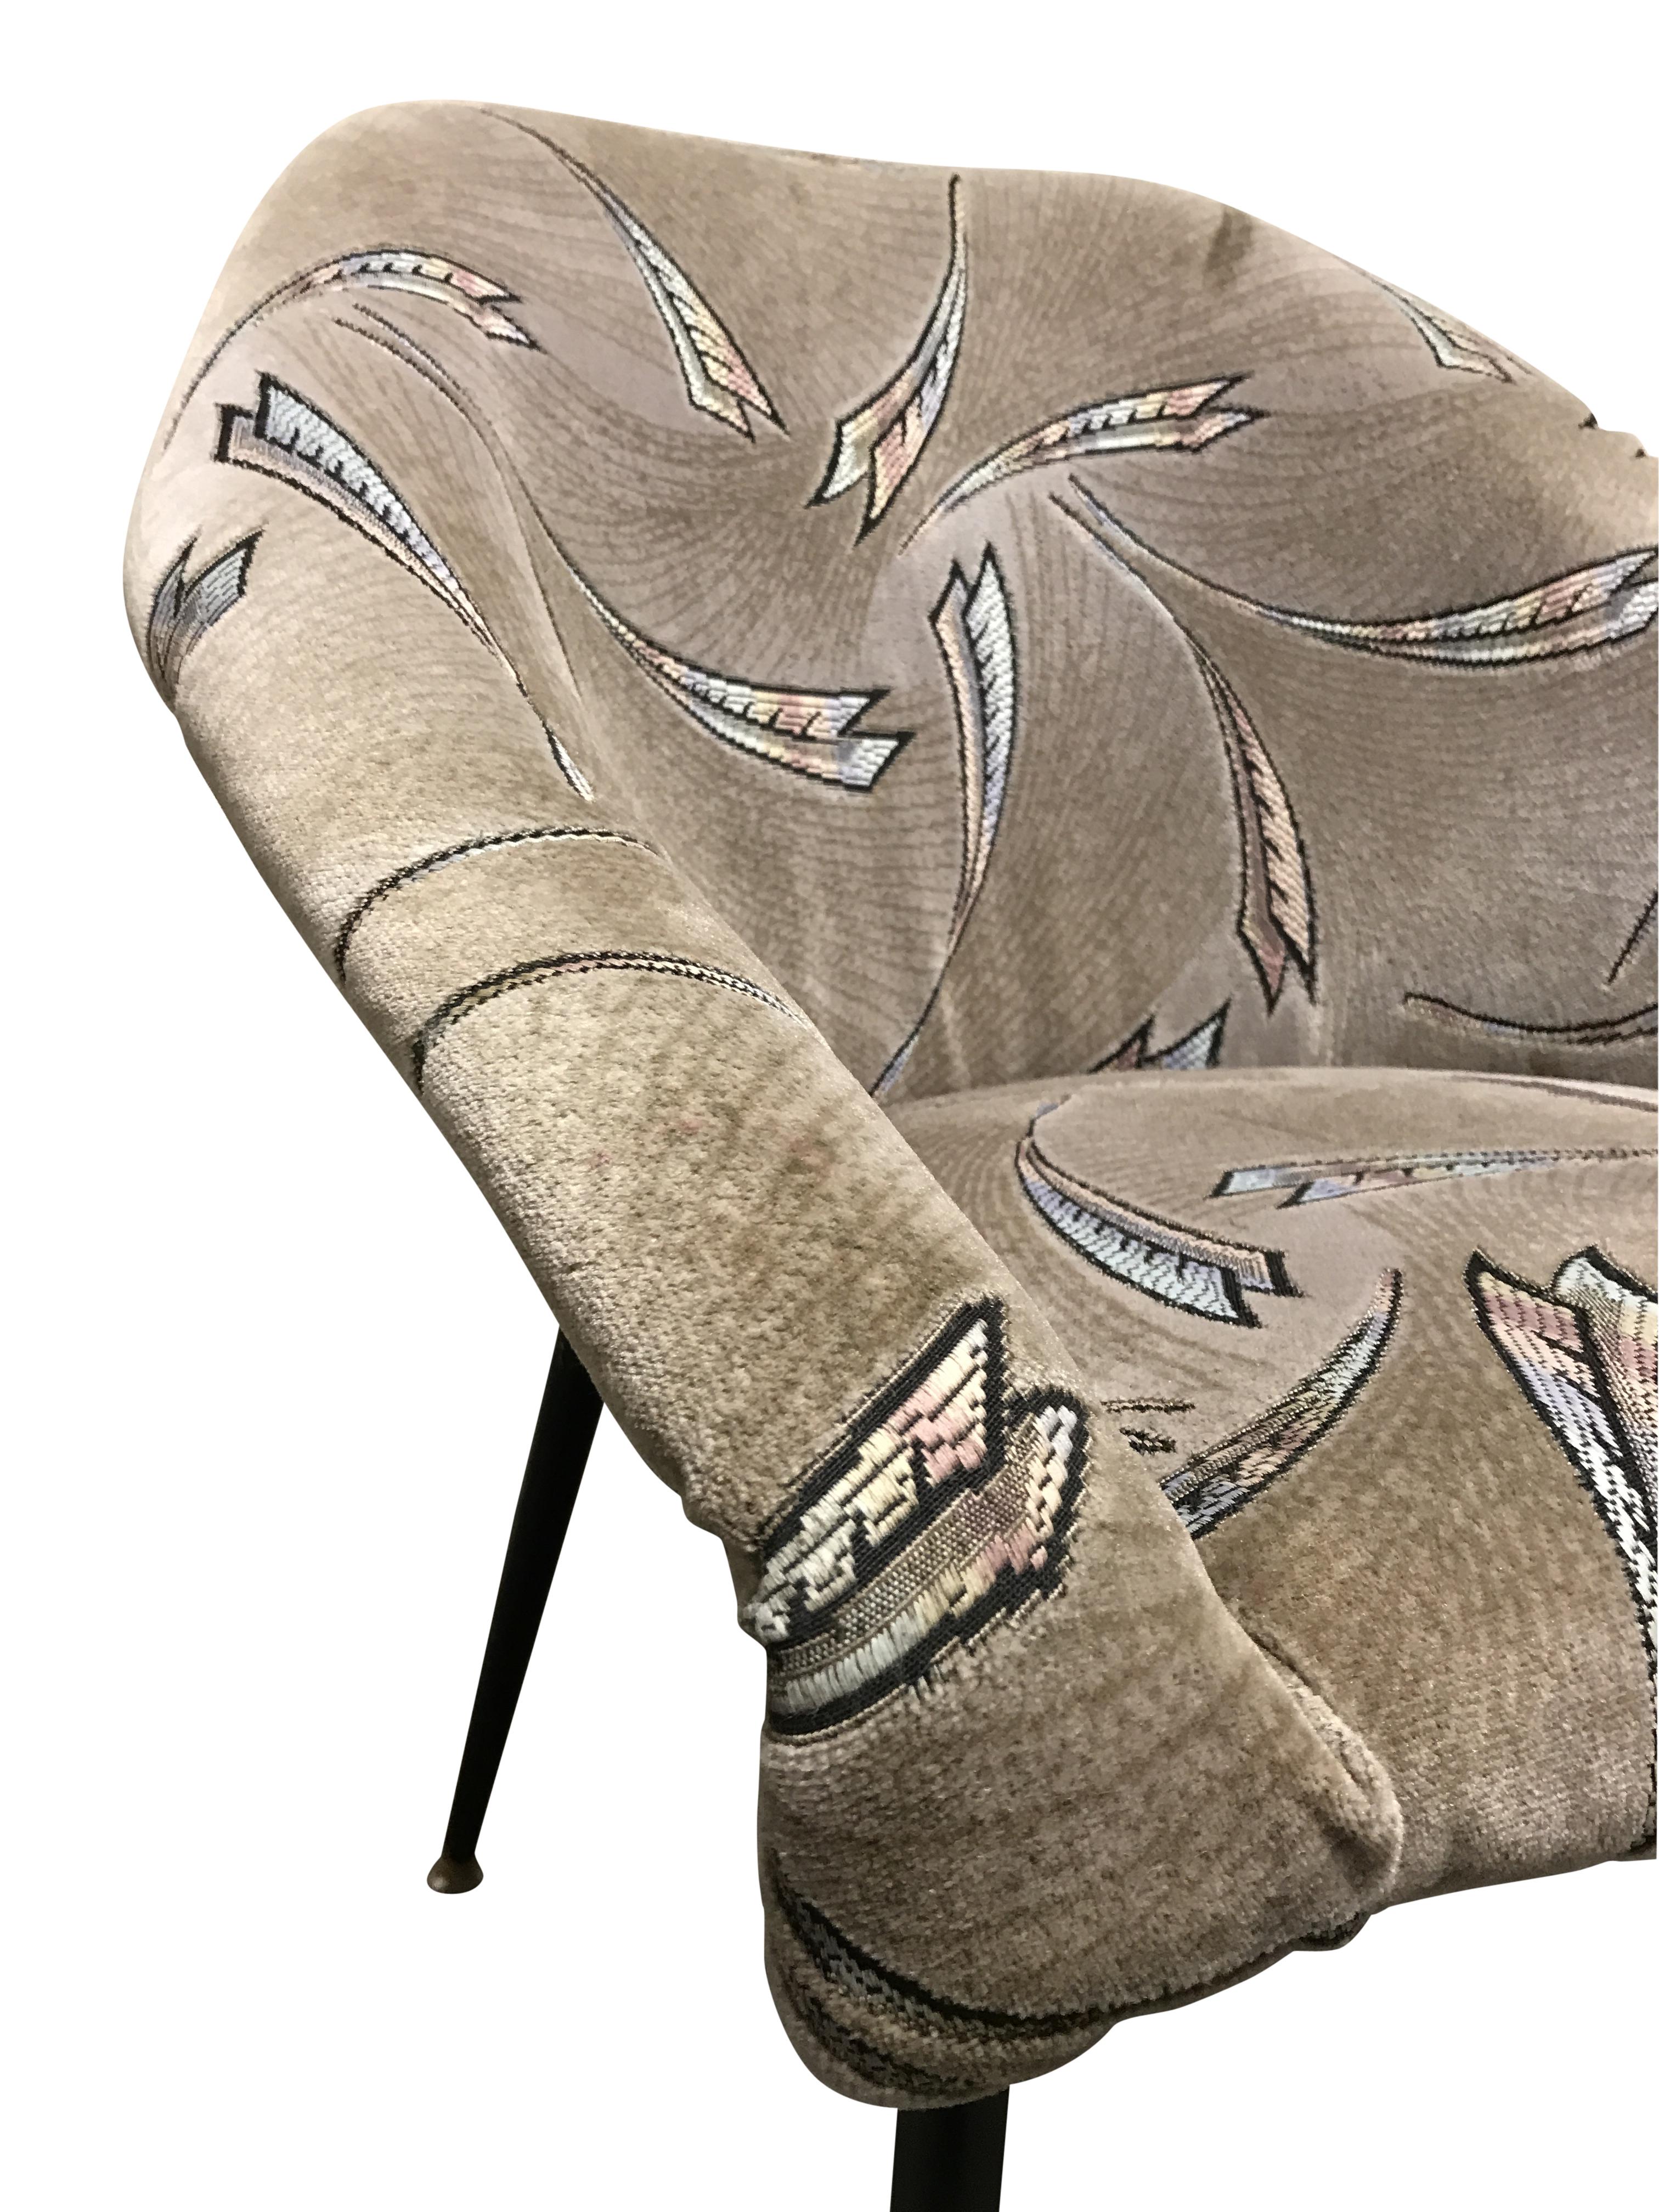 Pair of midcentury club or cocktail chairs upholstered in grey fabric with period decorative motives.

Beautiful, charming design. Mixes well with modern day interiors.

1960s - Czech republic.

Good condition, slight corrosion on the